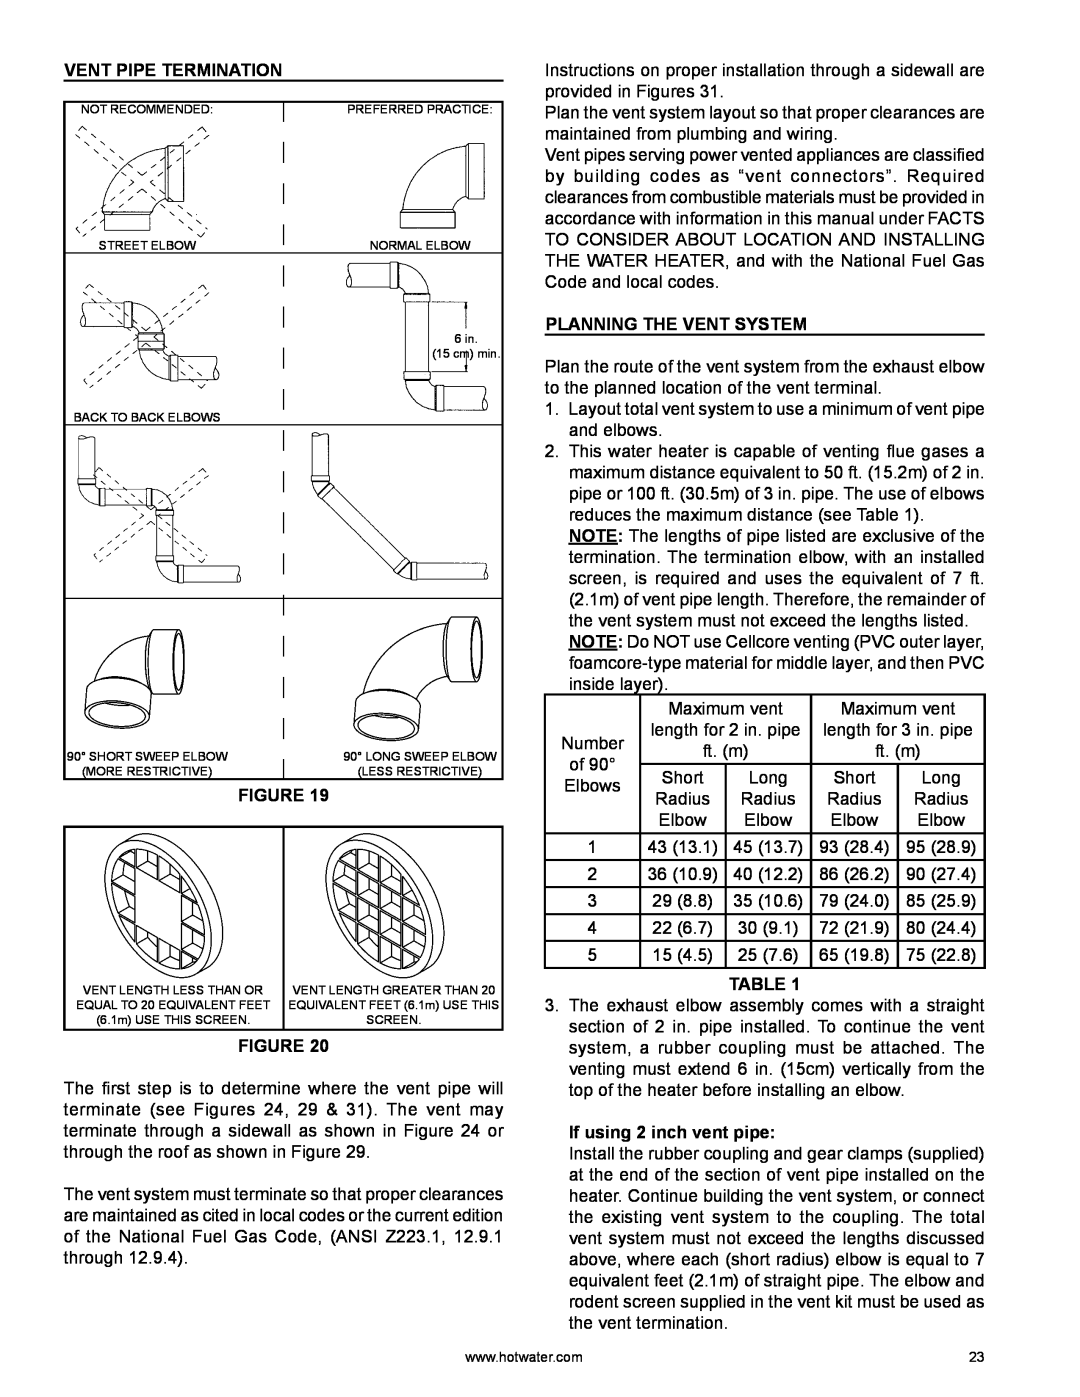 A.O. Smith HYB-90N warranty Vent Pipe Termination, Planning The Vent System, If using 2 inch vent pipe 